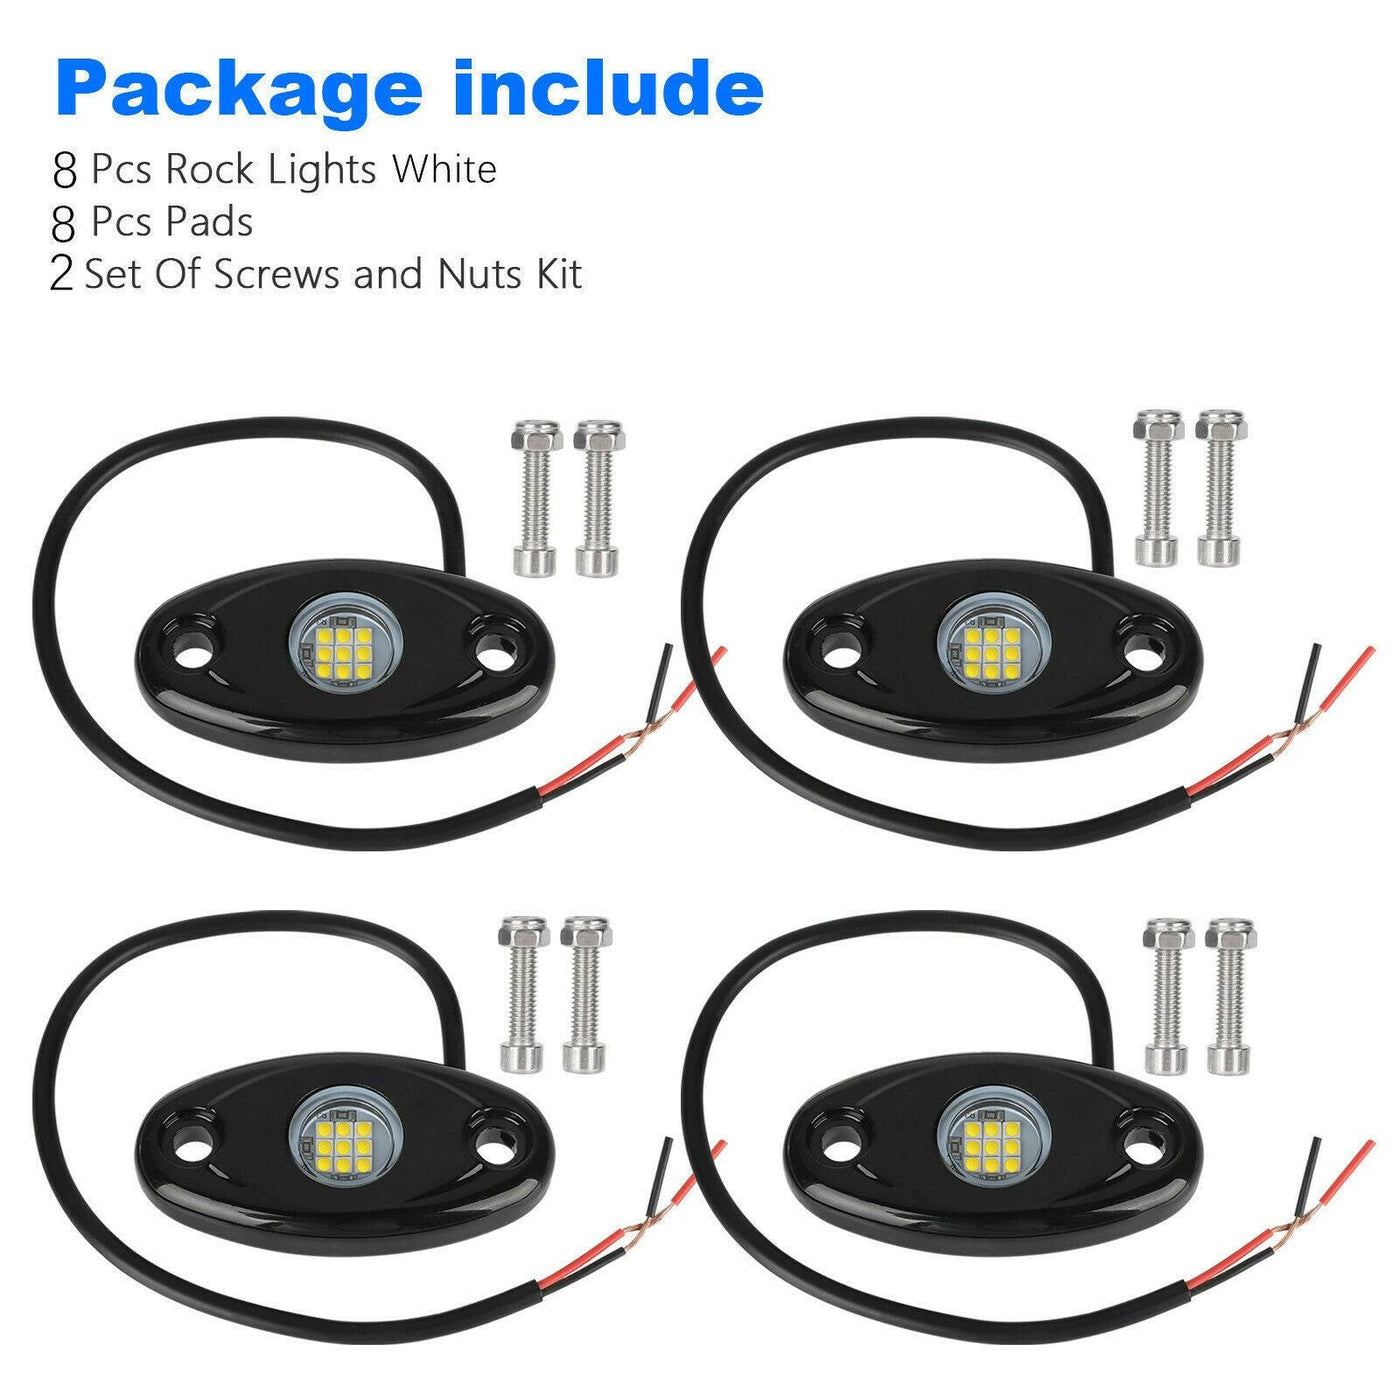 White 8 Pods CREE LED Rock Underbody Lights for JEEP Offroad Truck ATV UTV Boat - Moto Life Products